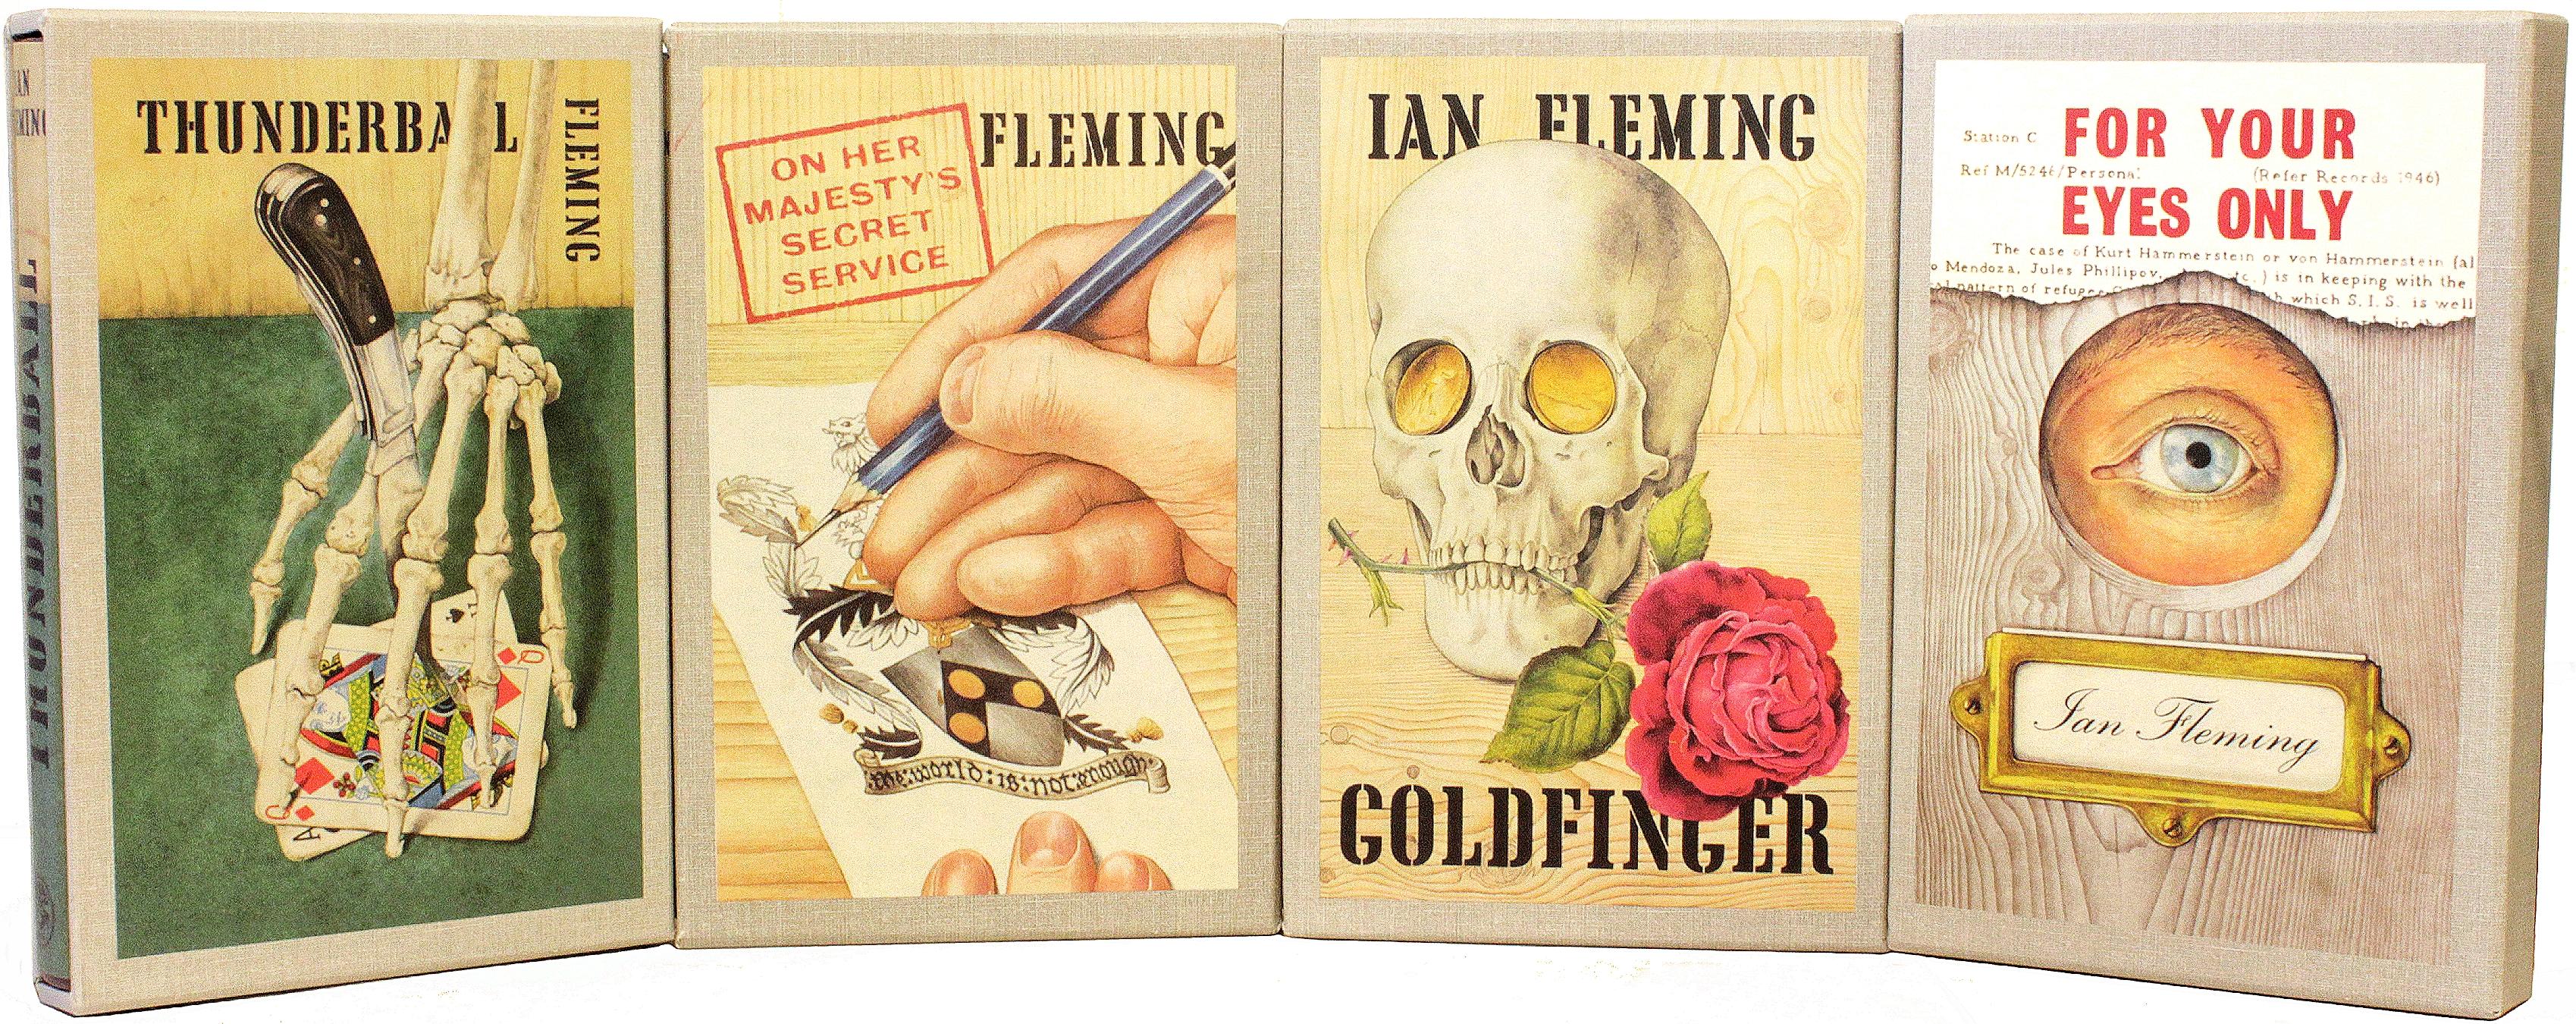 AUTHOR: FLEMING, Ian. 

TITLE: James Bond Series by Ian Fleming, Facsimile first edition library, 14 Vols. 1. Casino Royale 2. Doctor No 3. Diamonds are forever 4. For your eyes only 5. From Russia with love 6. Goldfinger 7. Live and let die 8. The